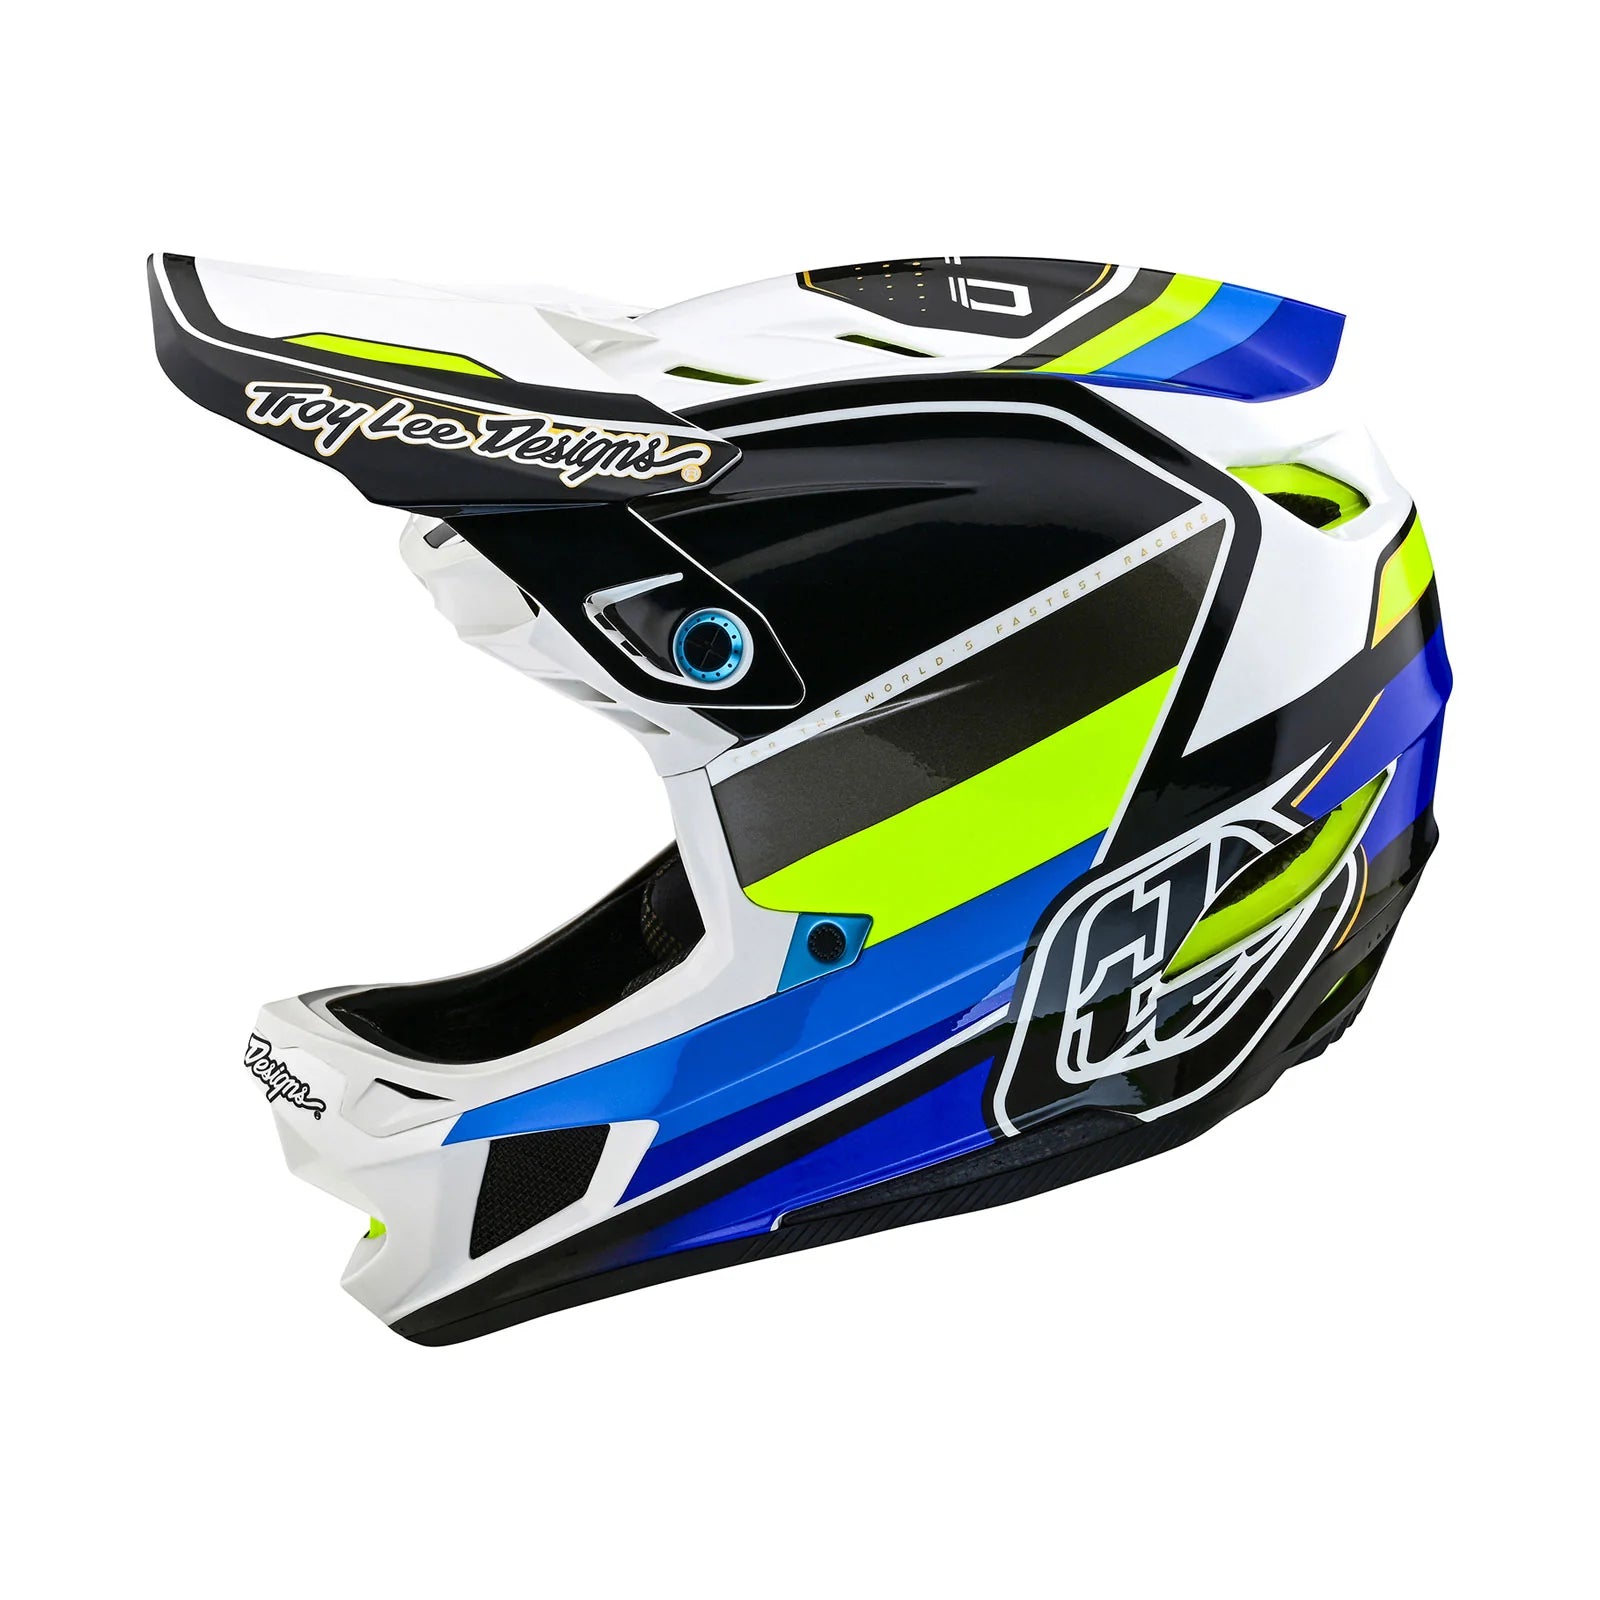 A TLD D4 AS Composite Helmet W/MIPS Reverb White with a blue and white design, featuring the Mips protection system for enhanced safety.